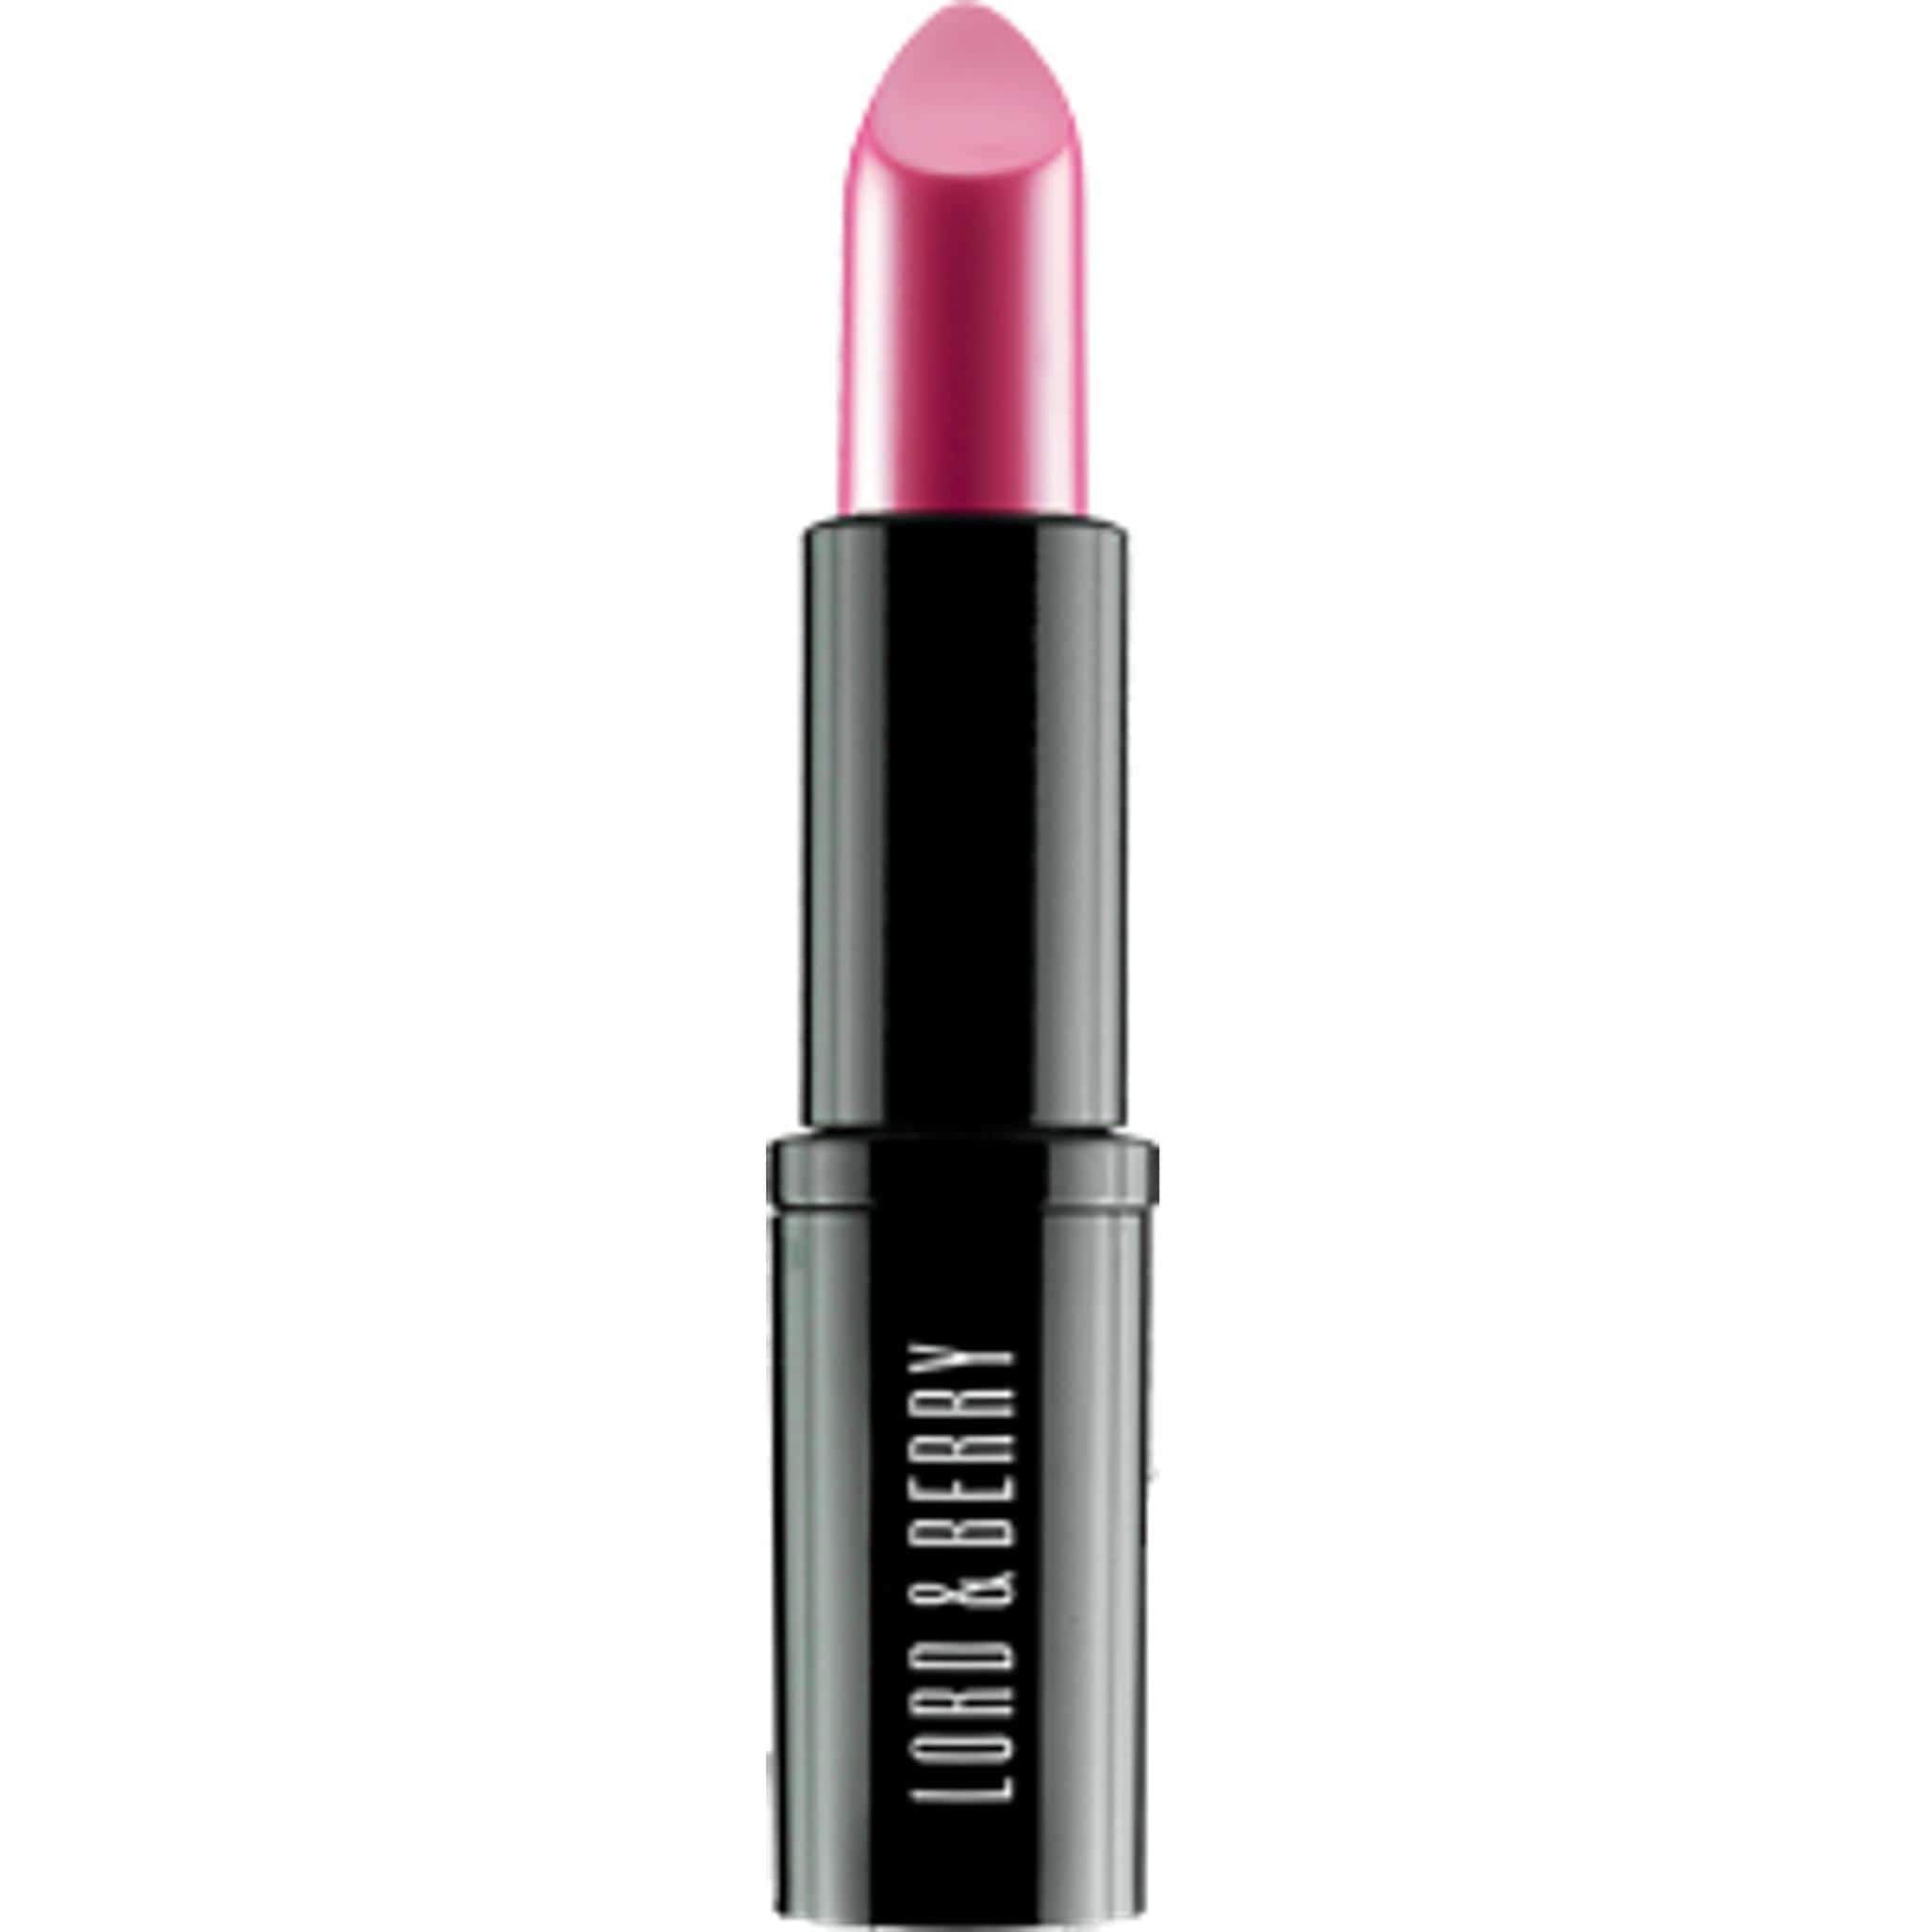 LORD & BERRY  Vogue - 60s-pink #7608, lipstick, London Loves Beauty